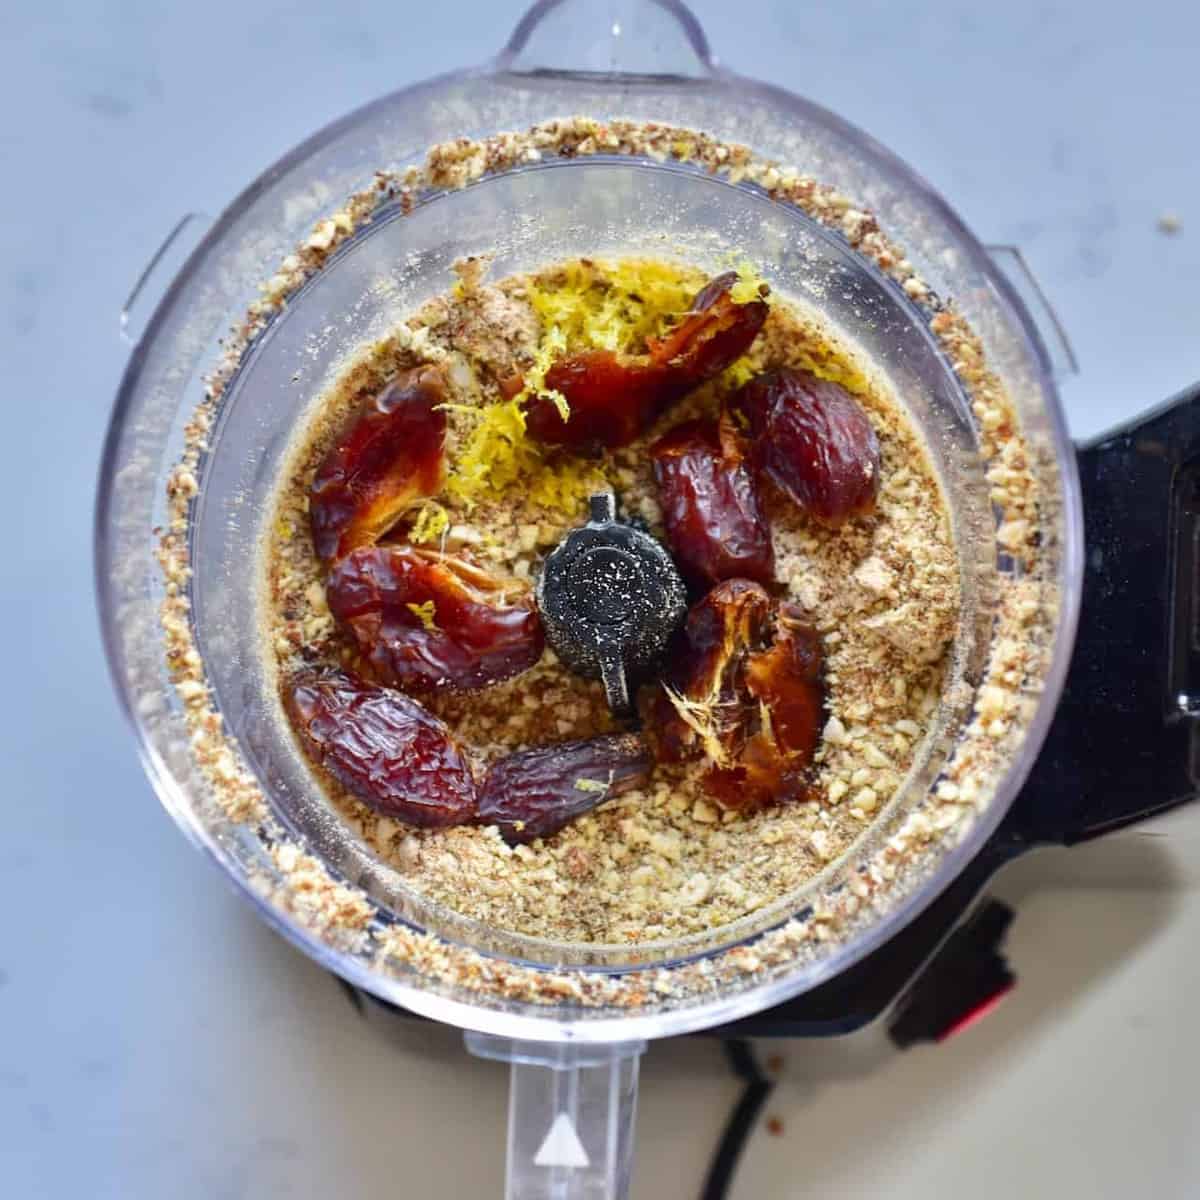 Almond flour and dates in a blender